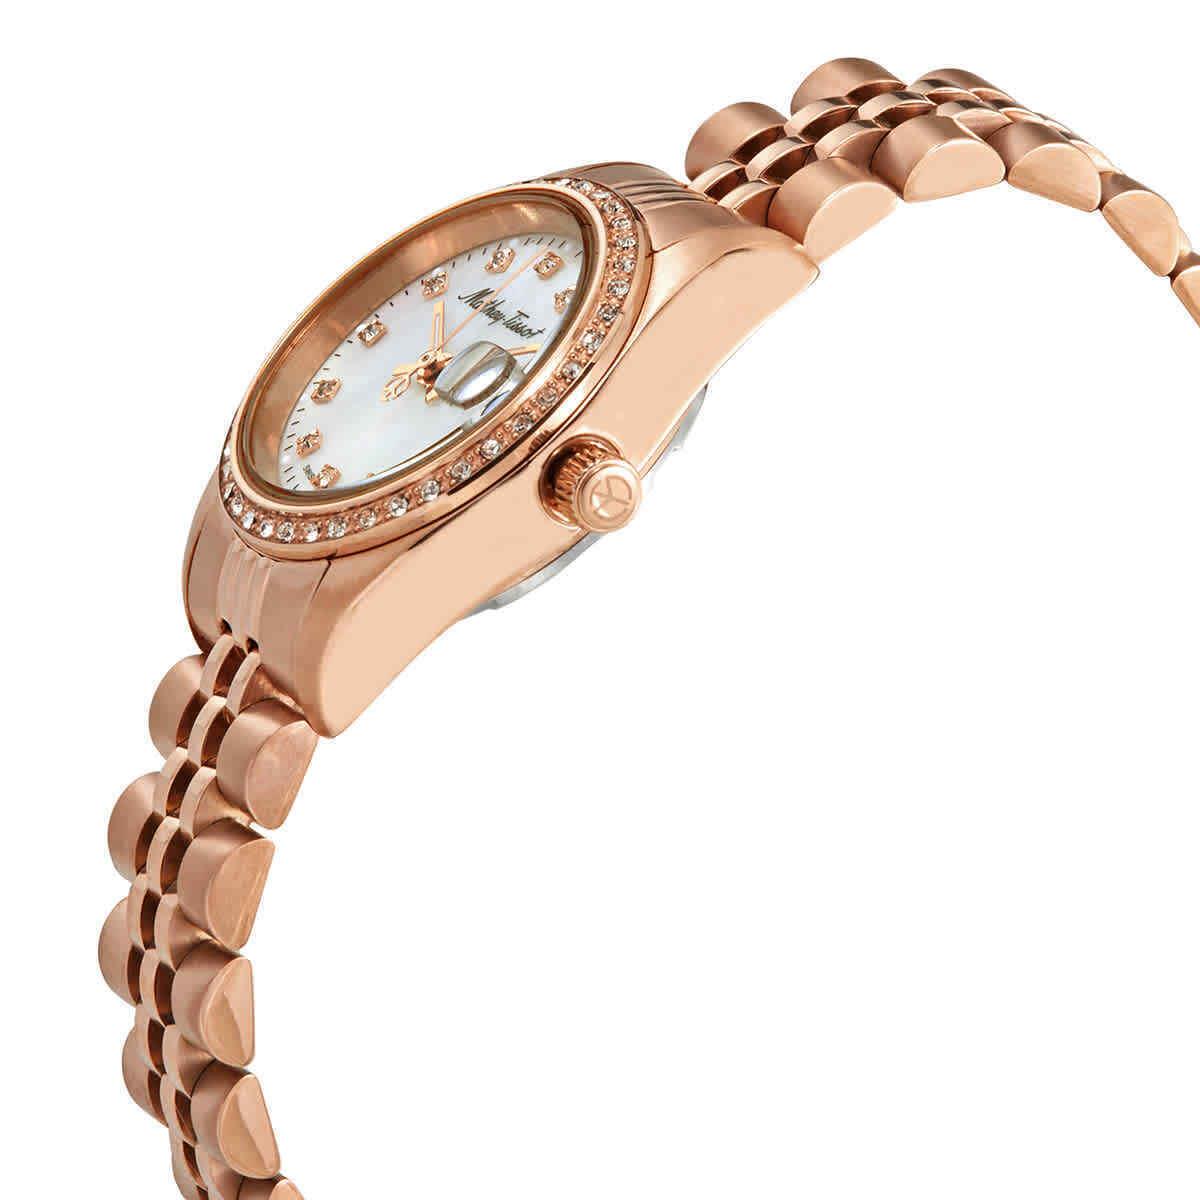 Mathey-tissot Mathy IV Mop Dial Ladies Watch D709RQI - Dial: Mother of Pearl, Band: Rose Gold-tone, Bezel: Rose Gold-tone